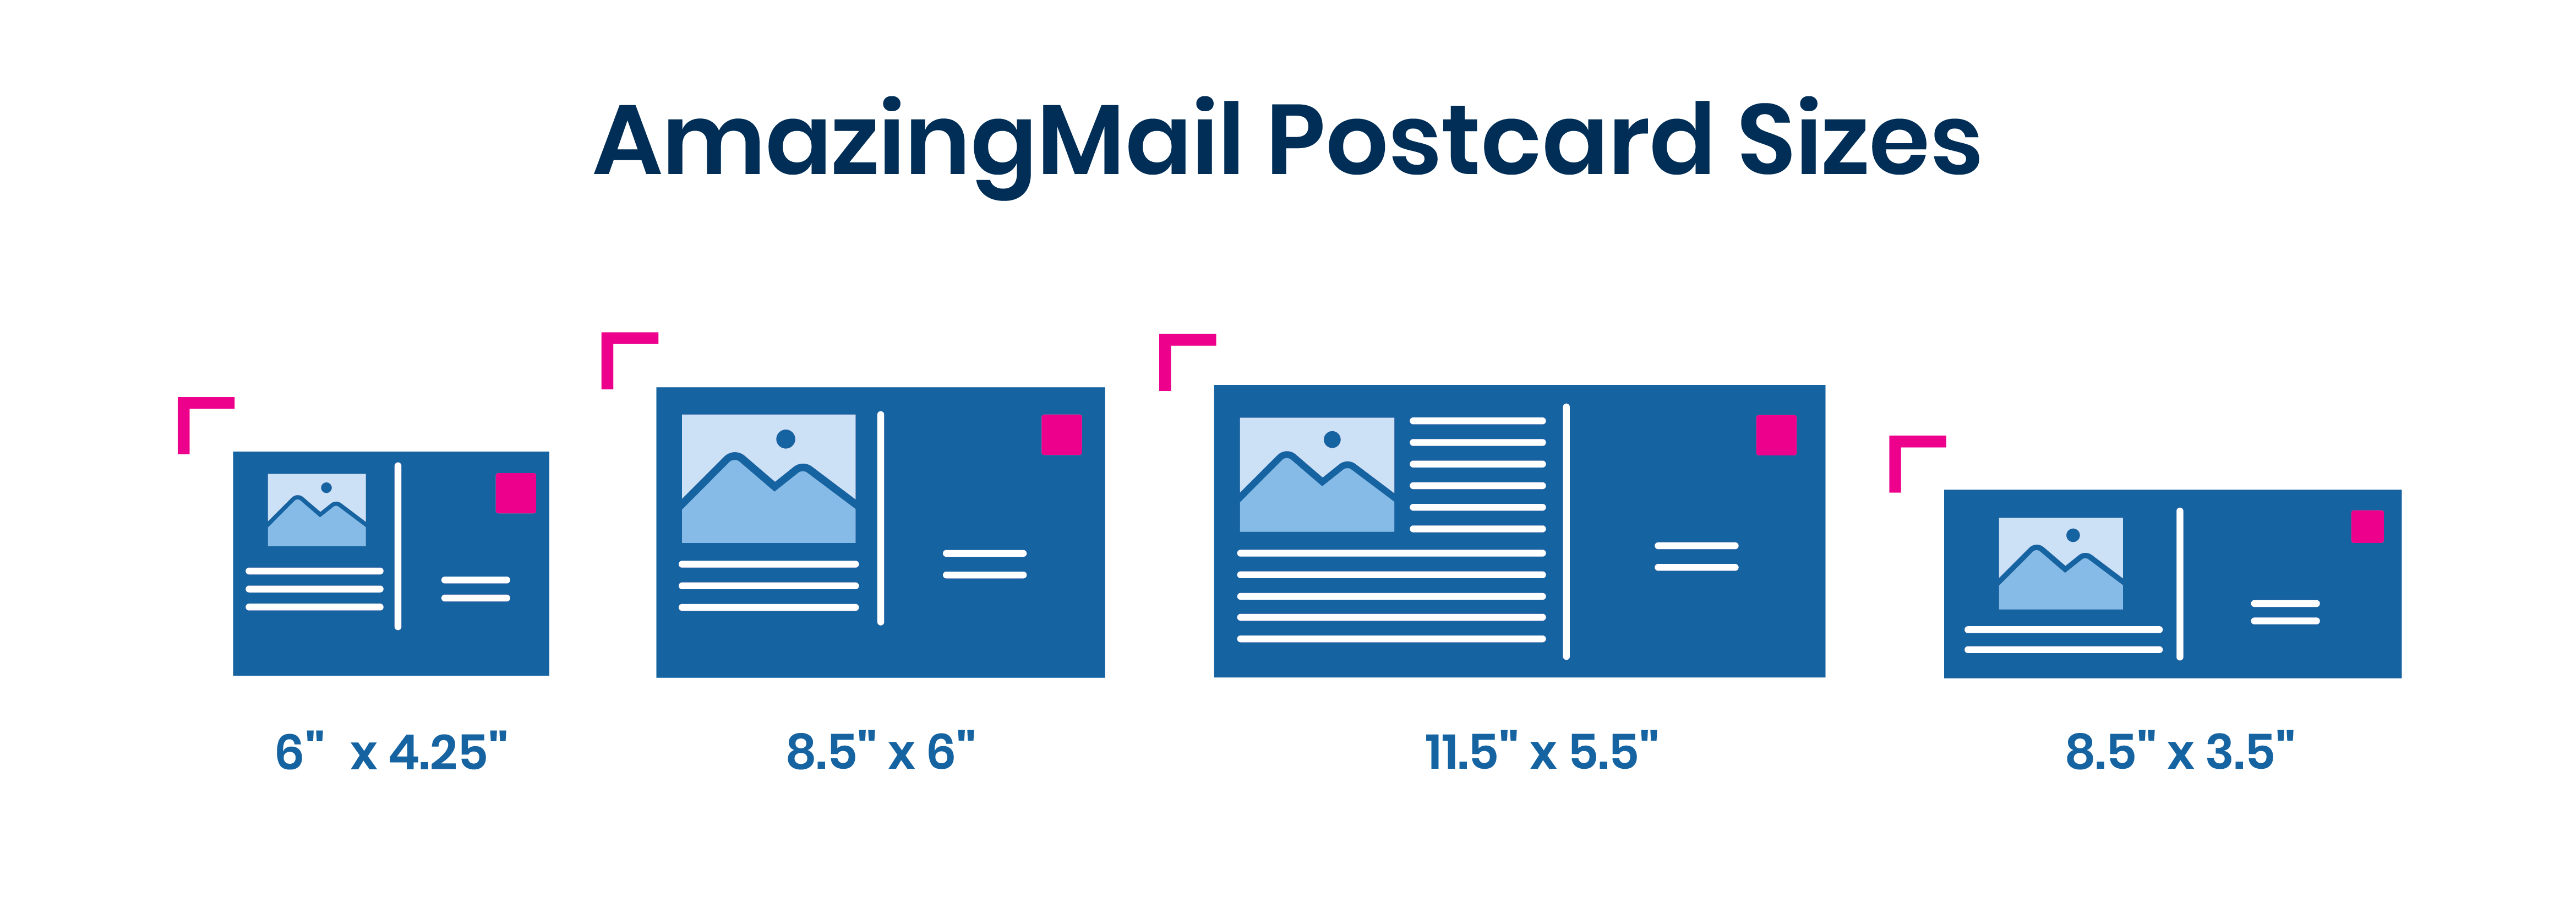 Postcard sizes for postcard campaigns 02